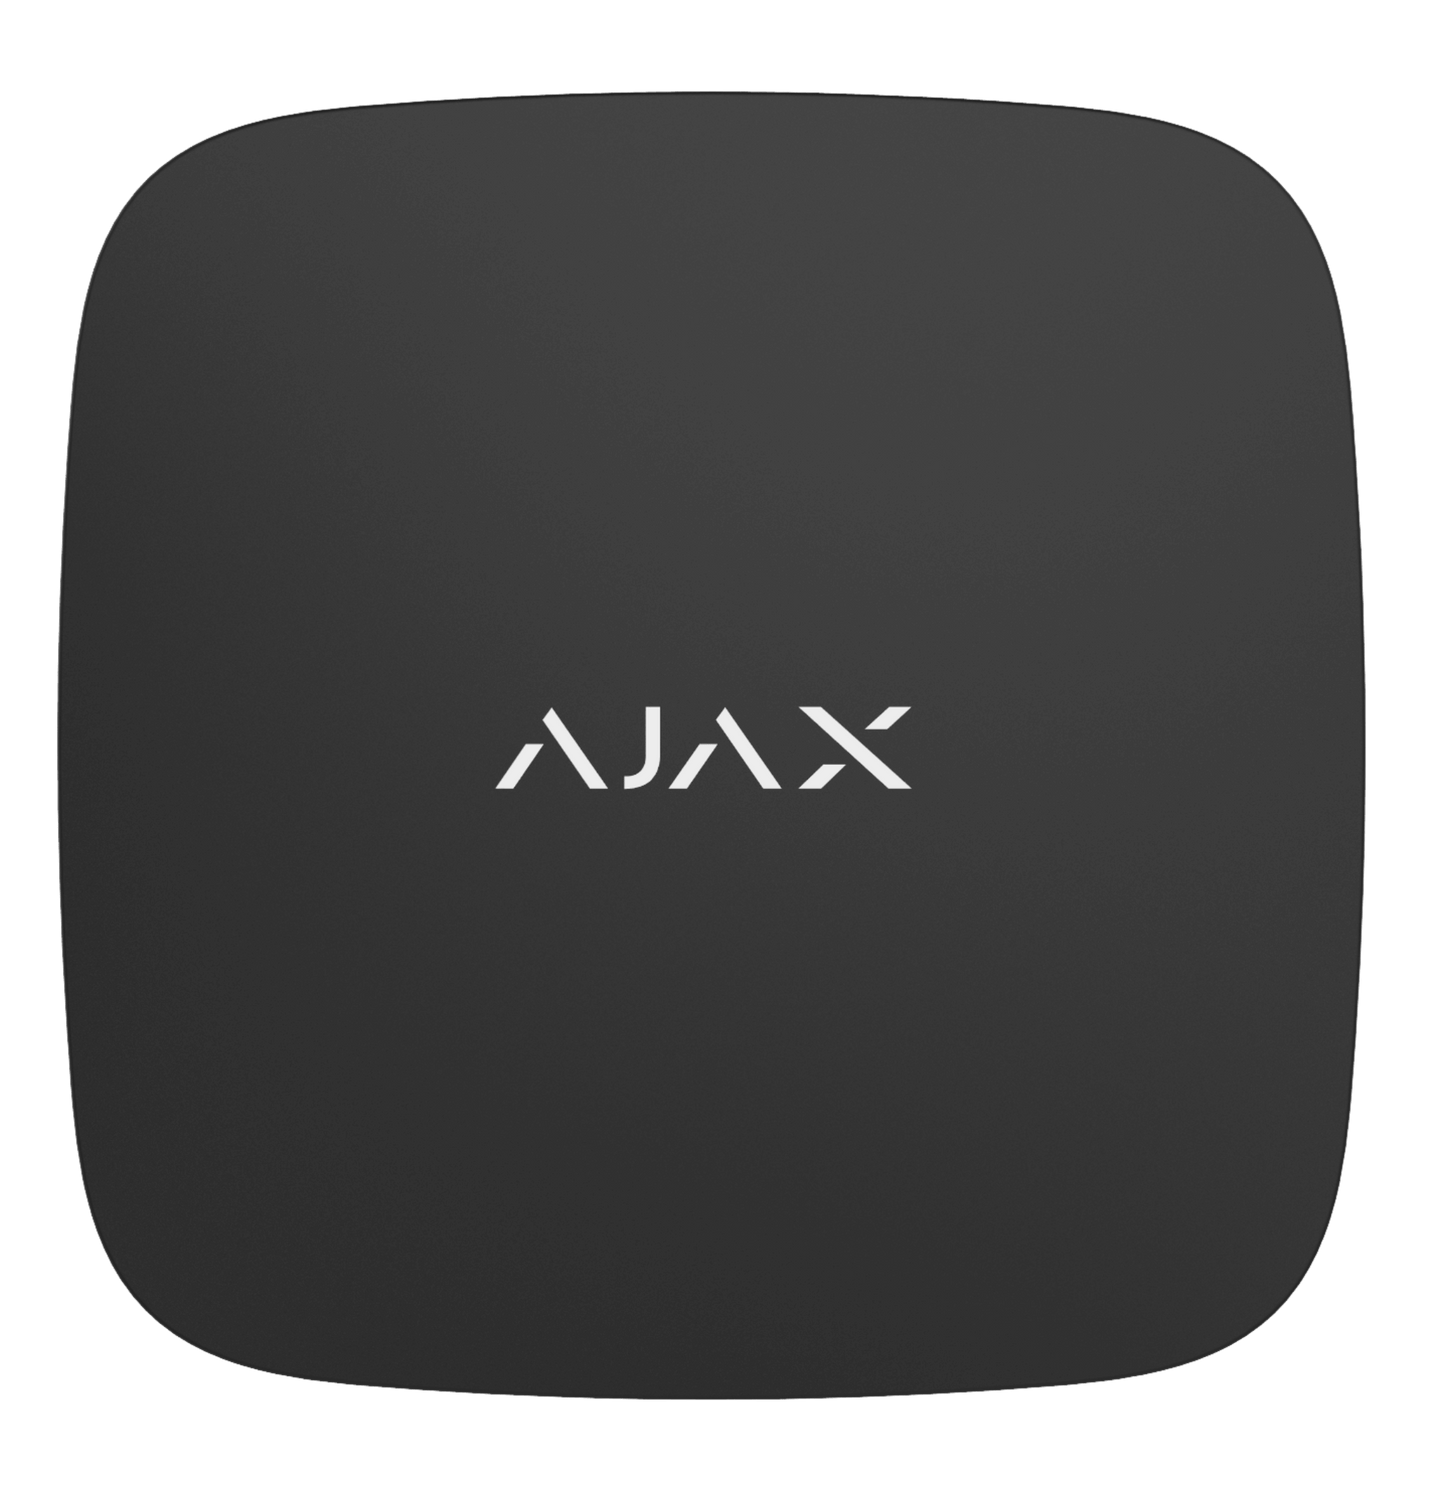 Black Ajax LeaksProtect a leak detection device for home and business security and flooding detection.  56 × 56 × 14 mm in size, 61 grams in weight, front view of device, IP65 rated